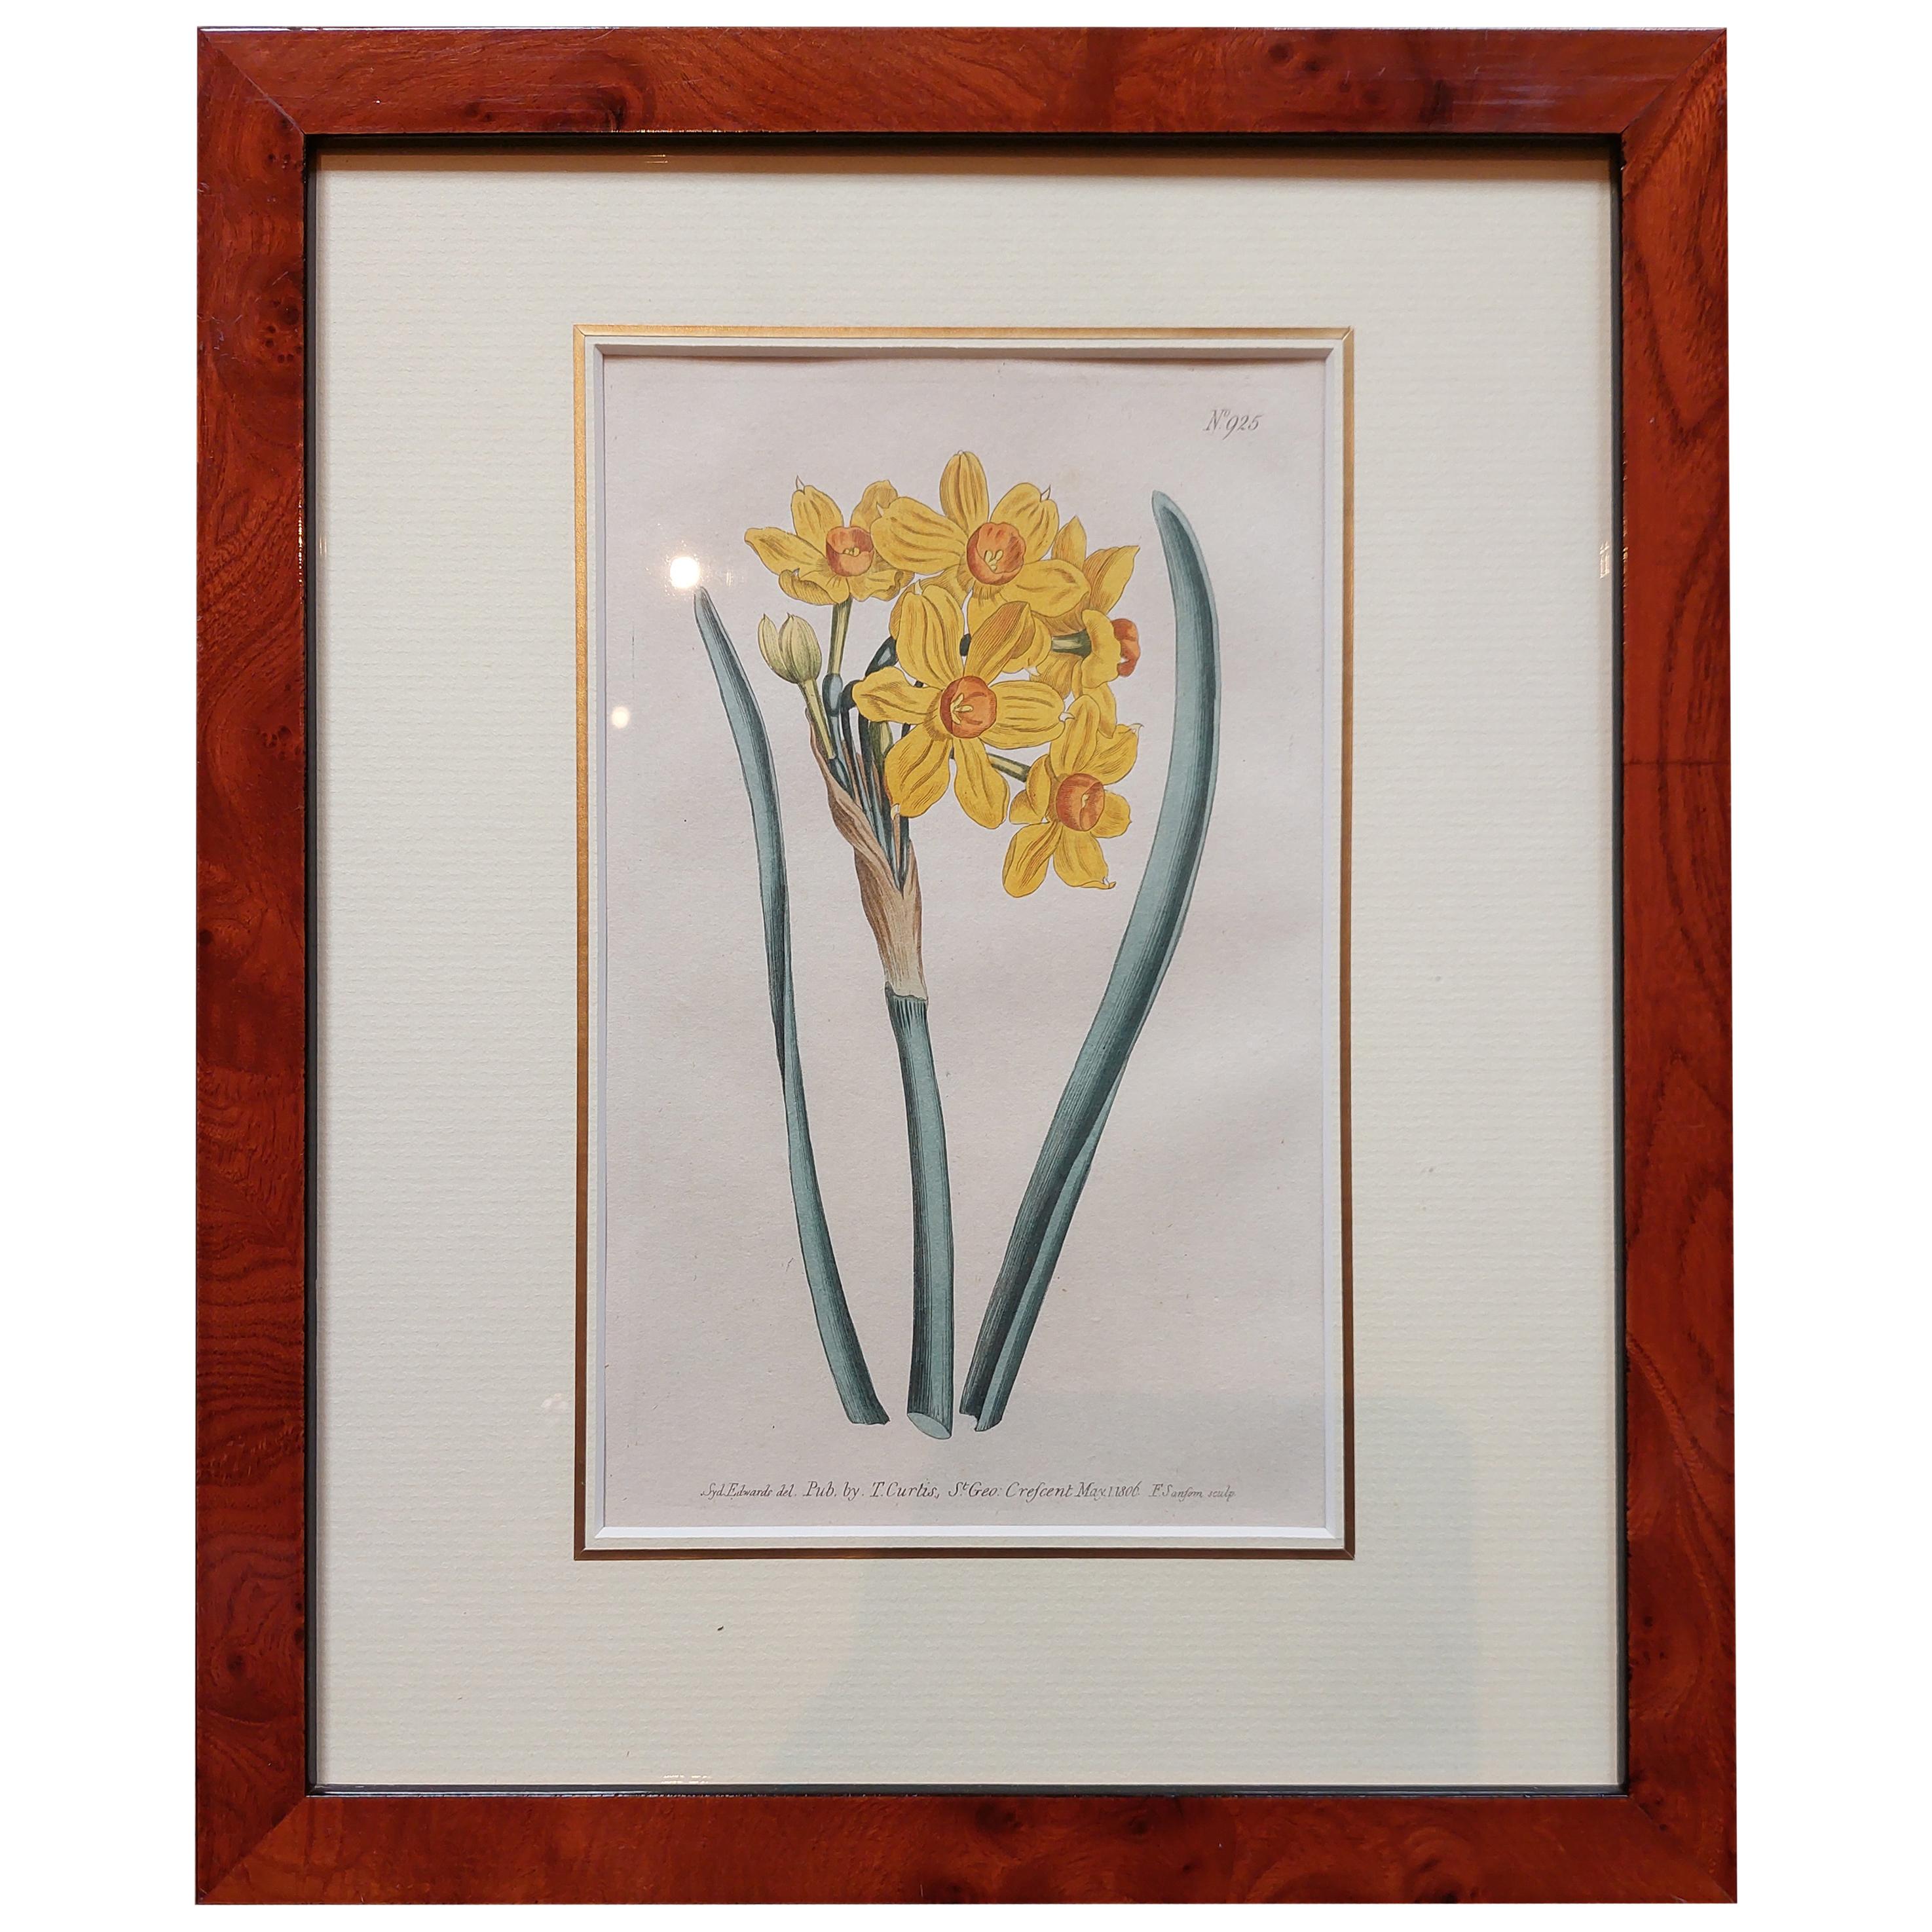 Antique Botany Print in Frame of Narcissus Tazetta or Polyanthus Narcissus, 1806 For Sale